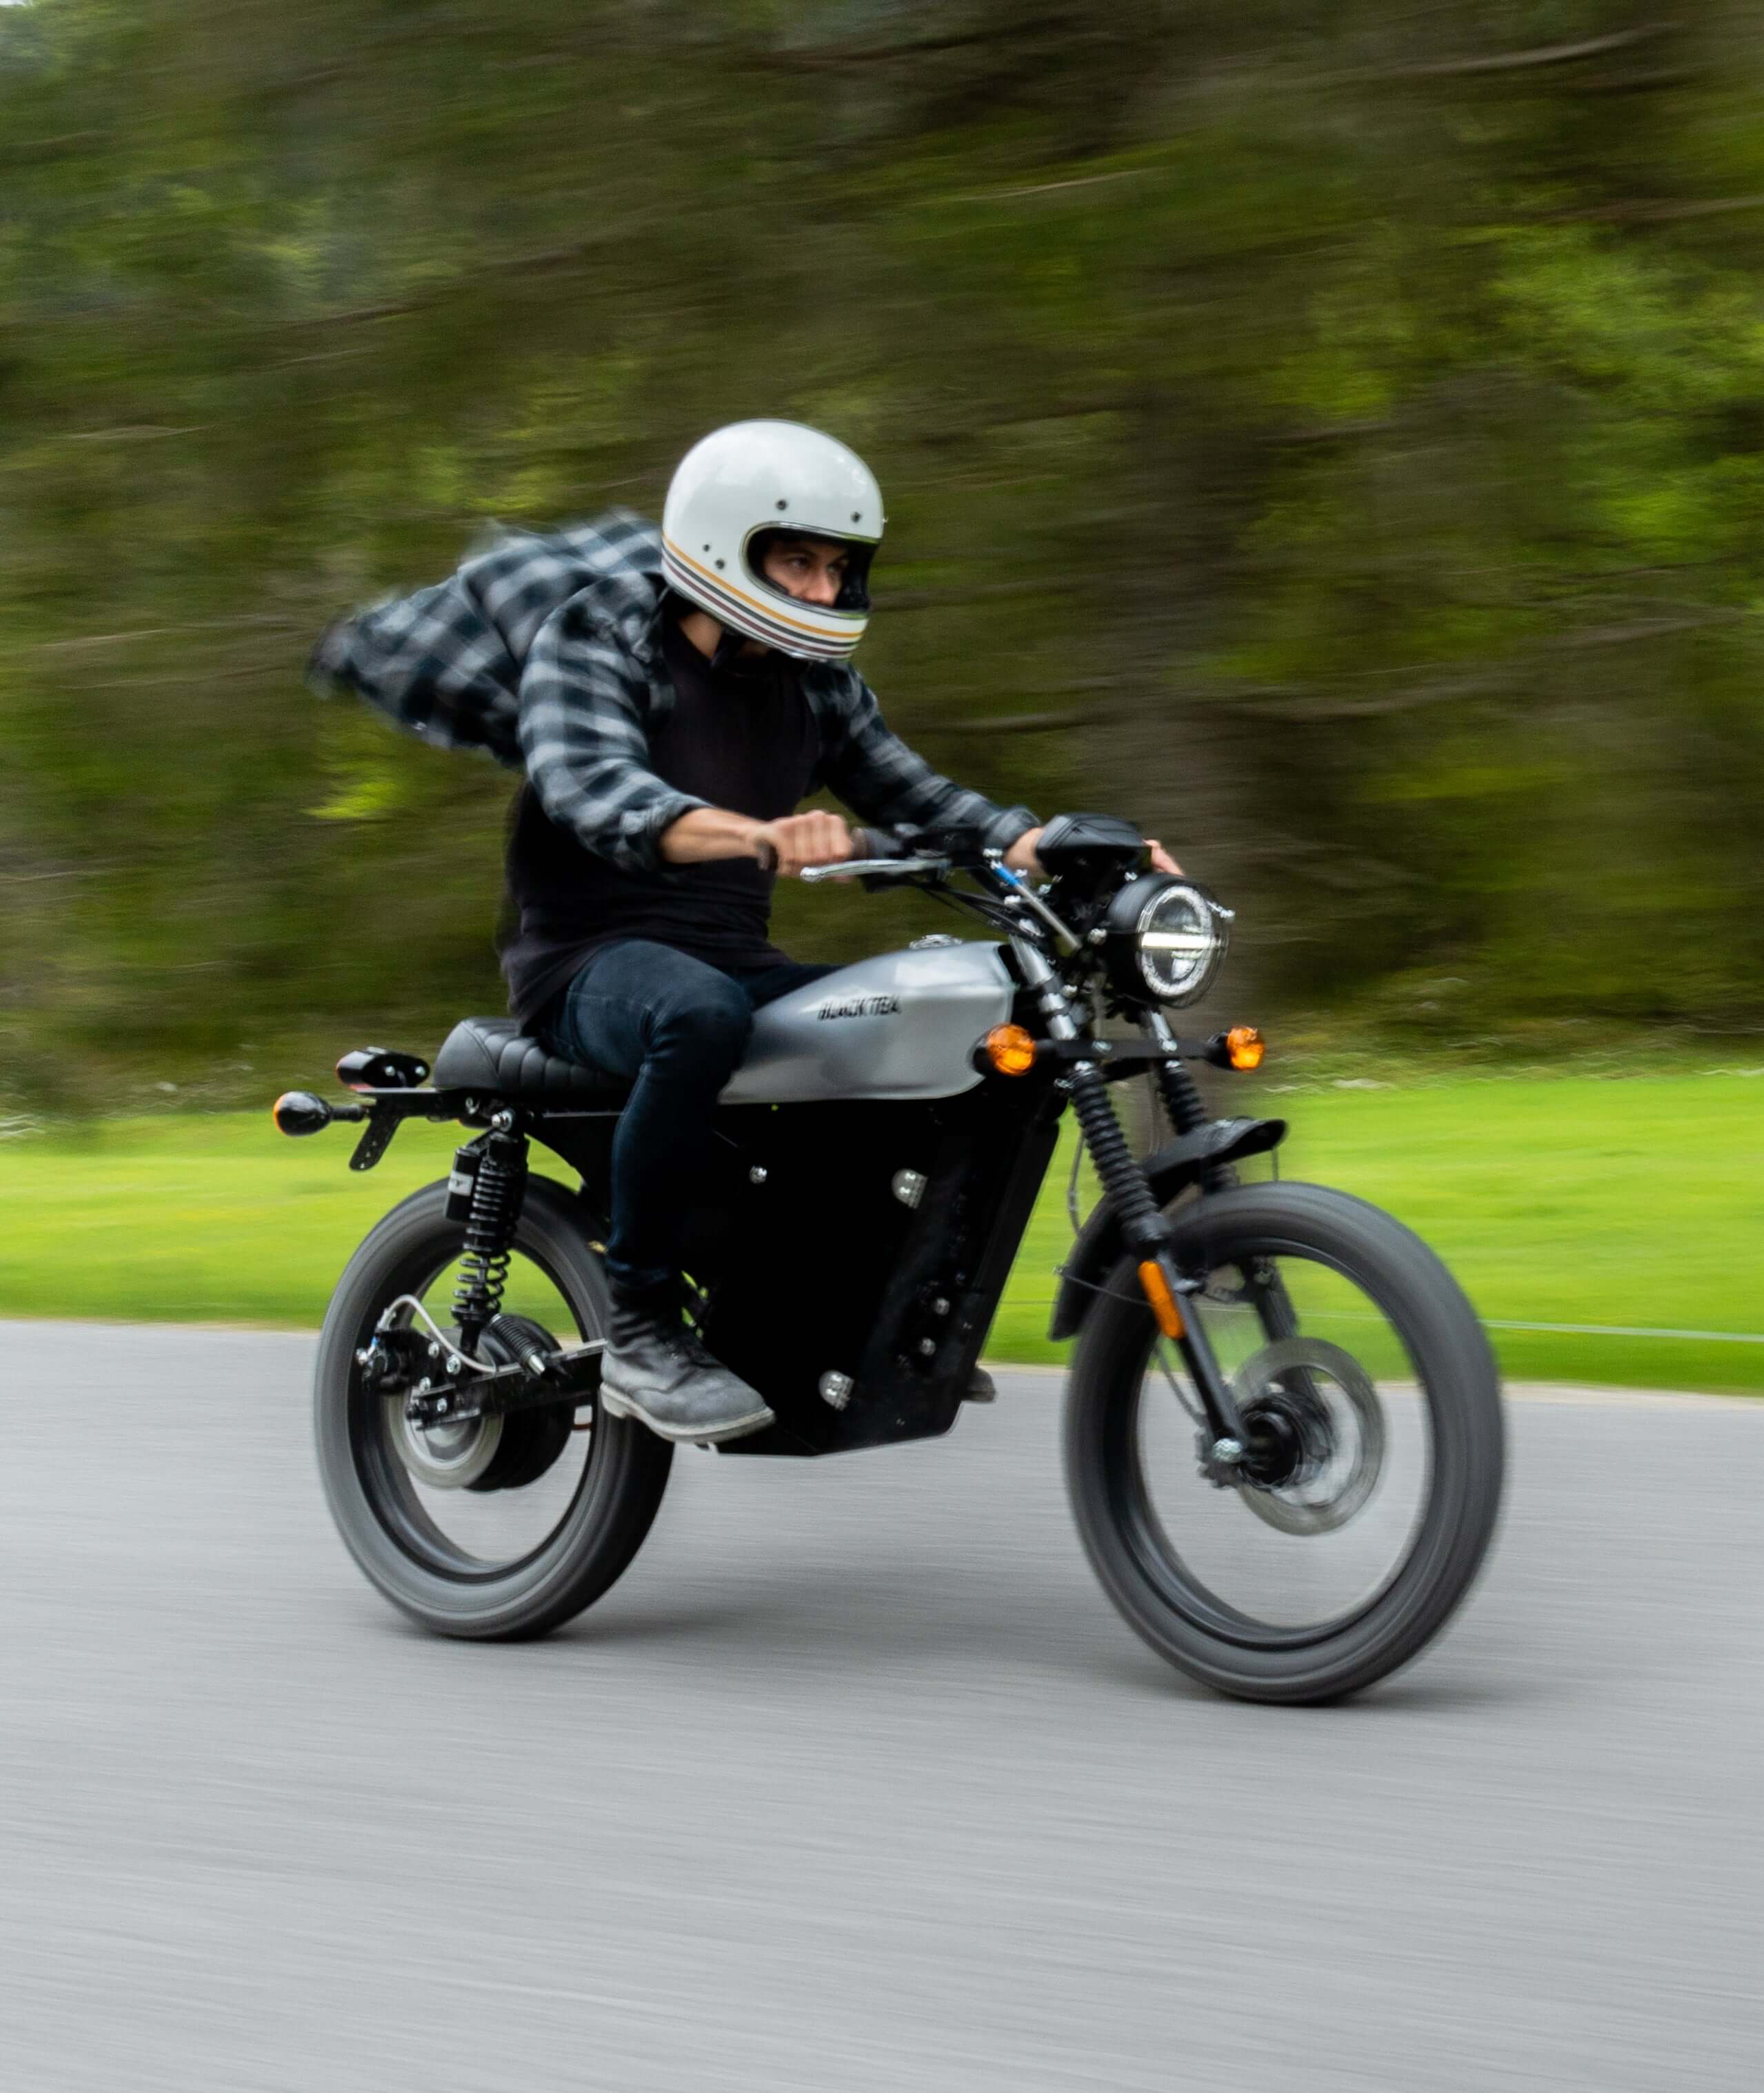 Rider on Electric Motorcycle with vintage Design